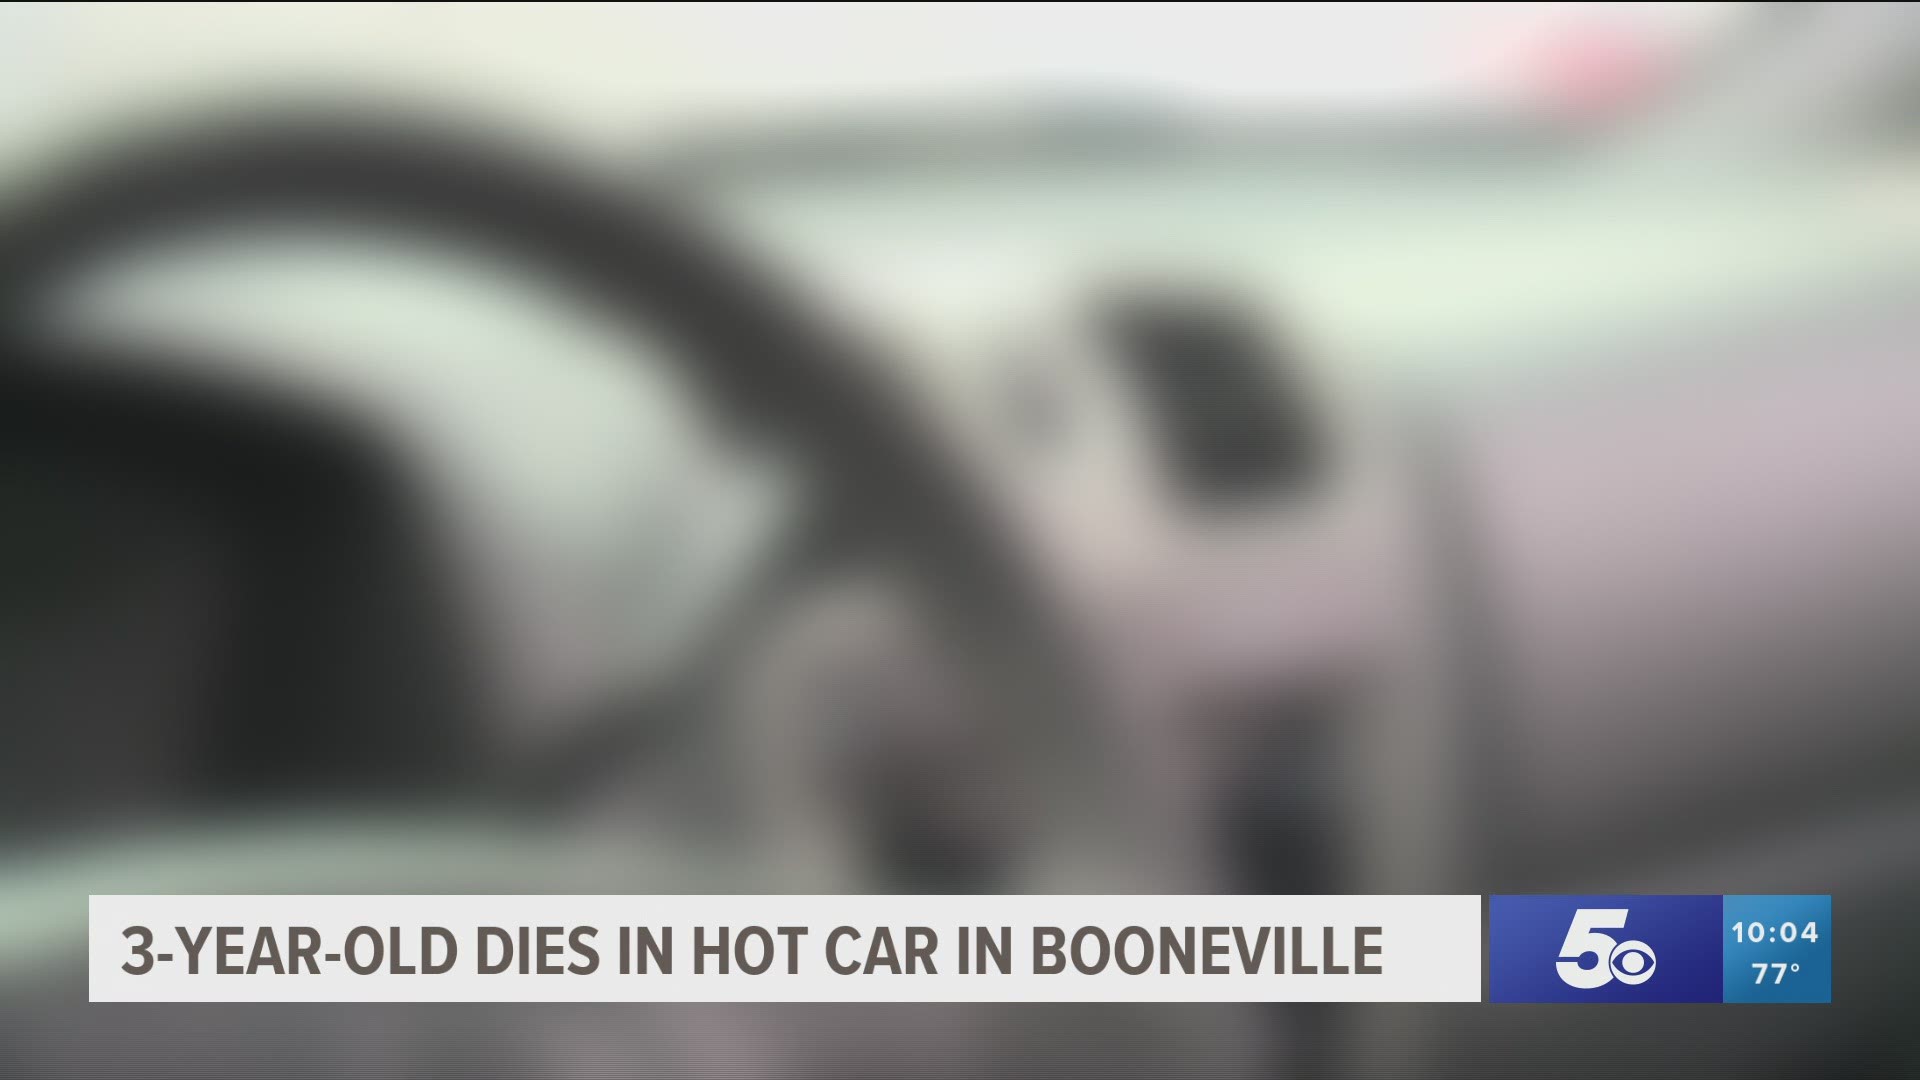 A 3-year-old is dead, and her 15-month-old sister is in critical condition after being found inside a hot car in Booneville. https://bit.ly/3eQ3z6m